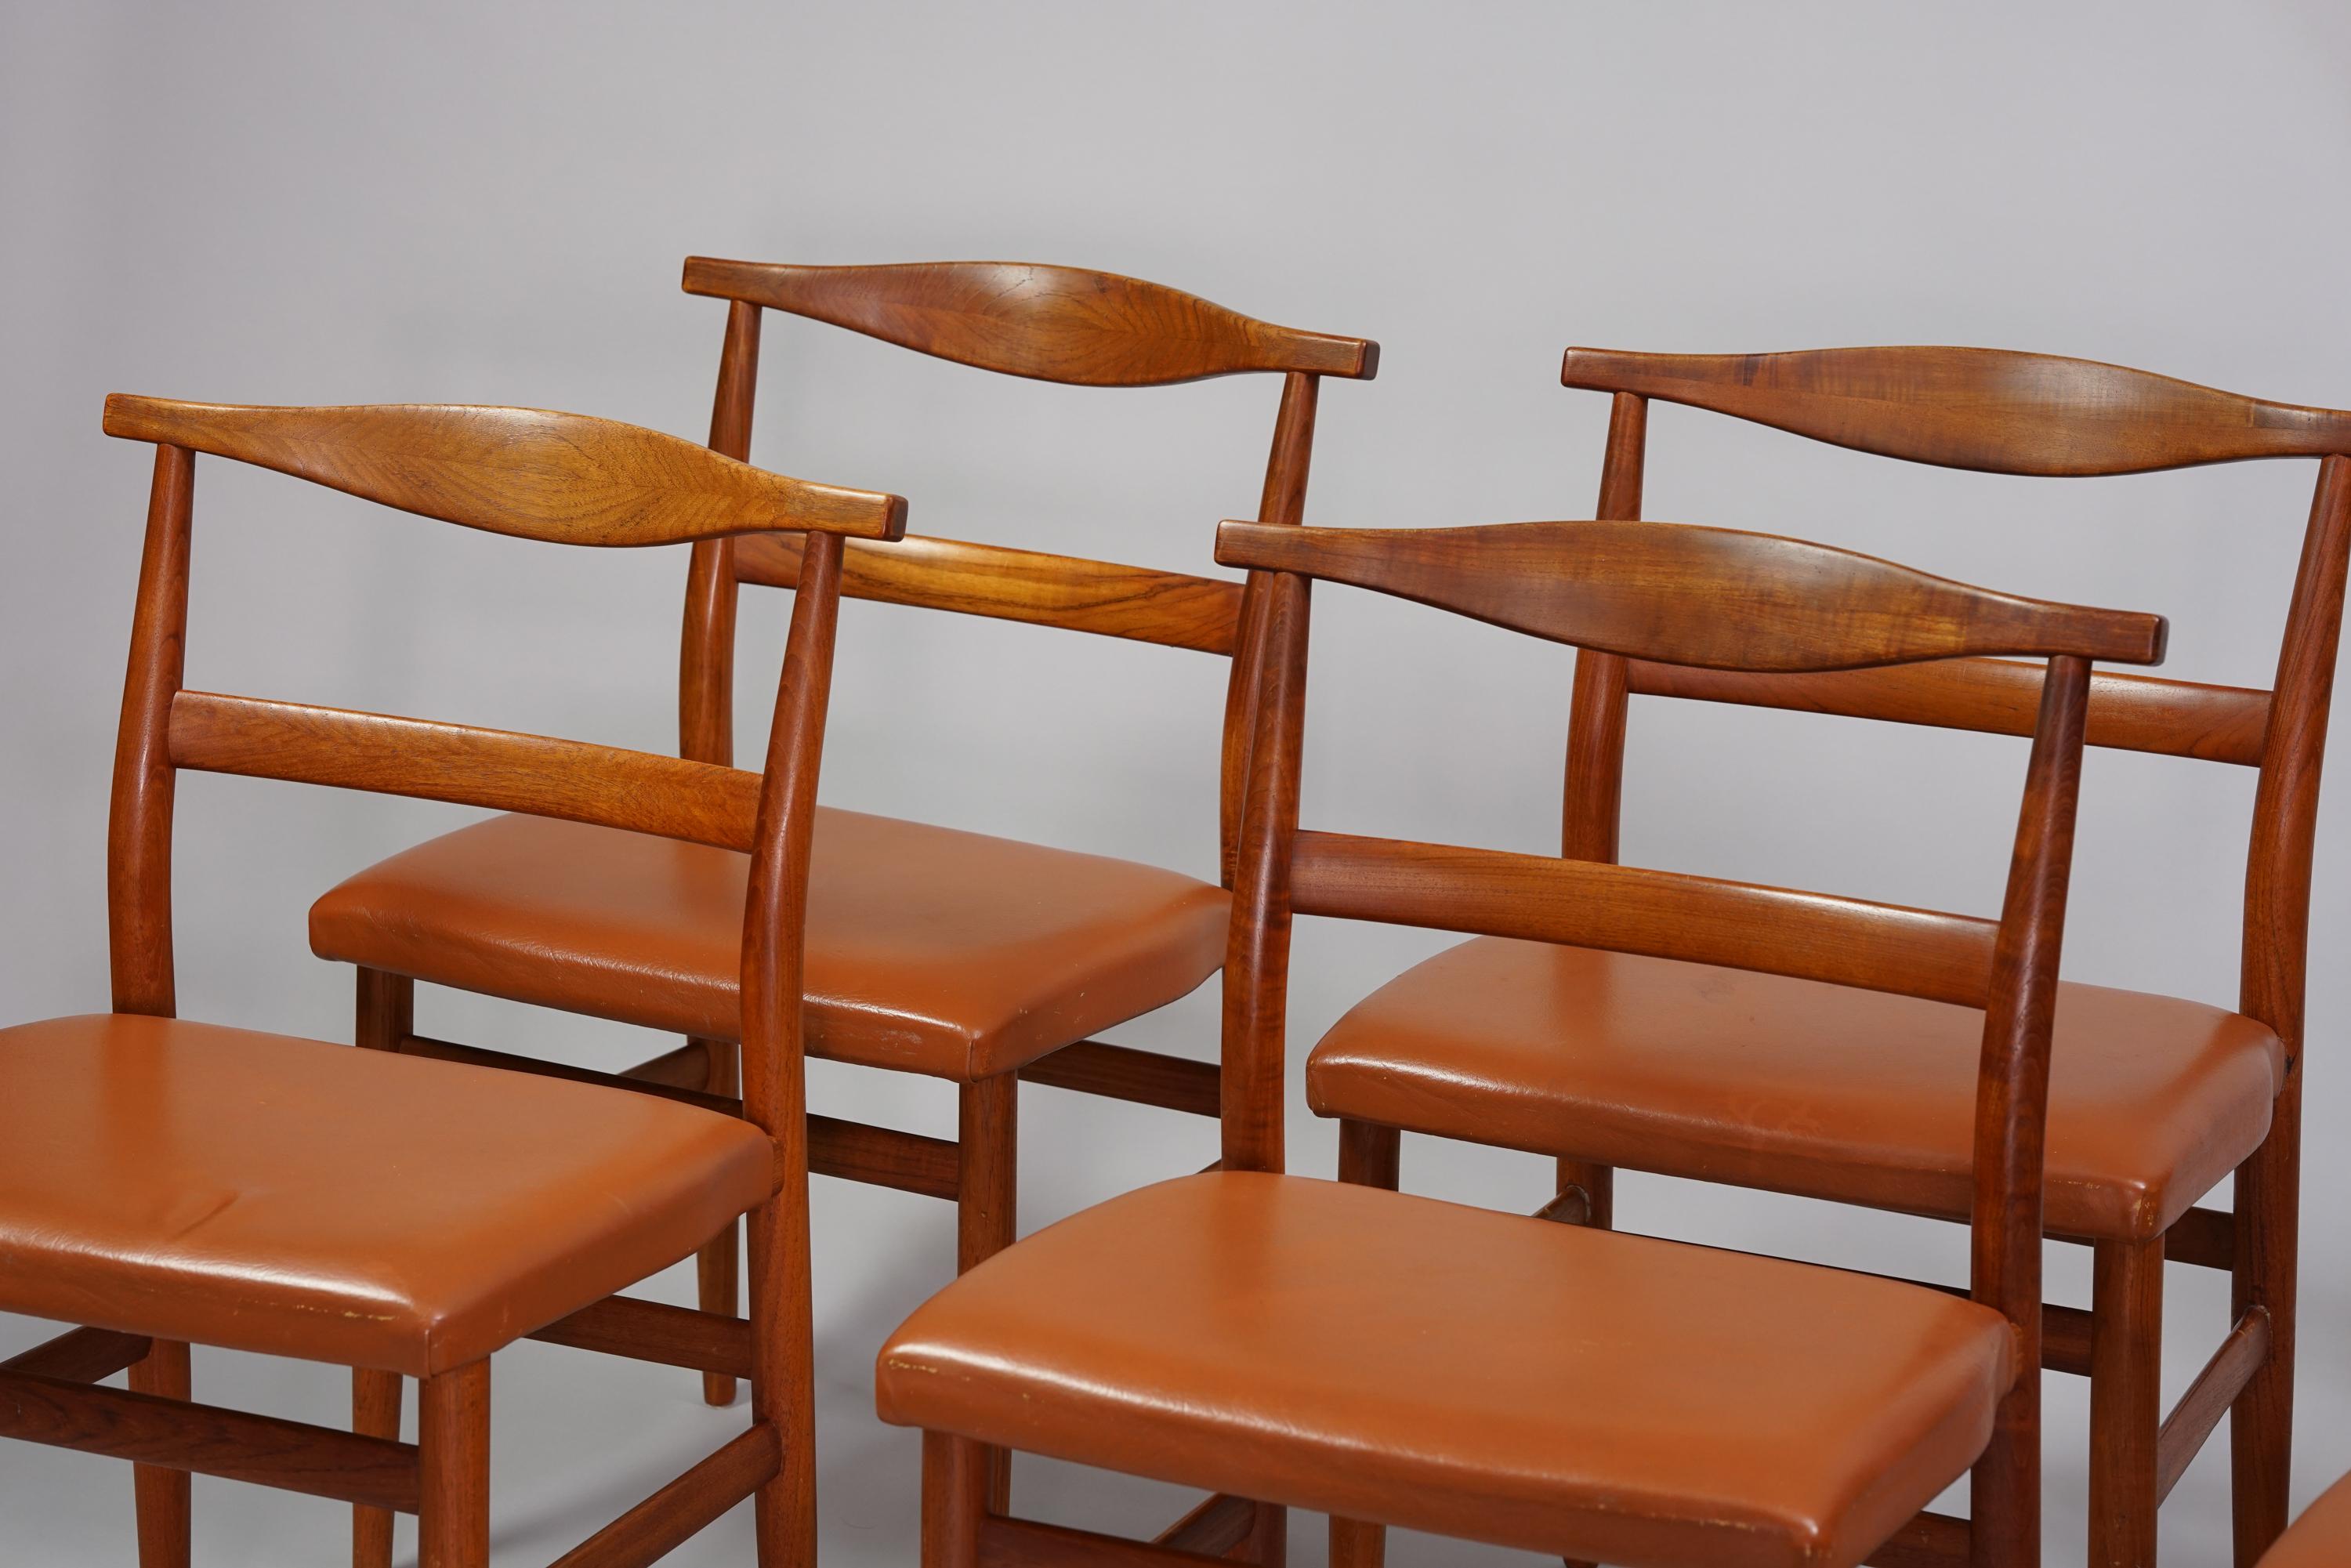 Set of six dining room chairs by Olof Ottelin from the 1950s/1960s. Teak frame, leather seats. Good vintage condition, wear consistent with age and use. The chairs will be sold as as set.